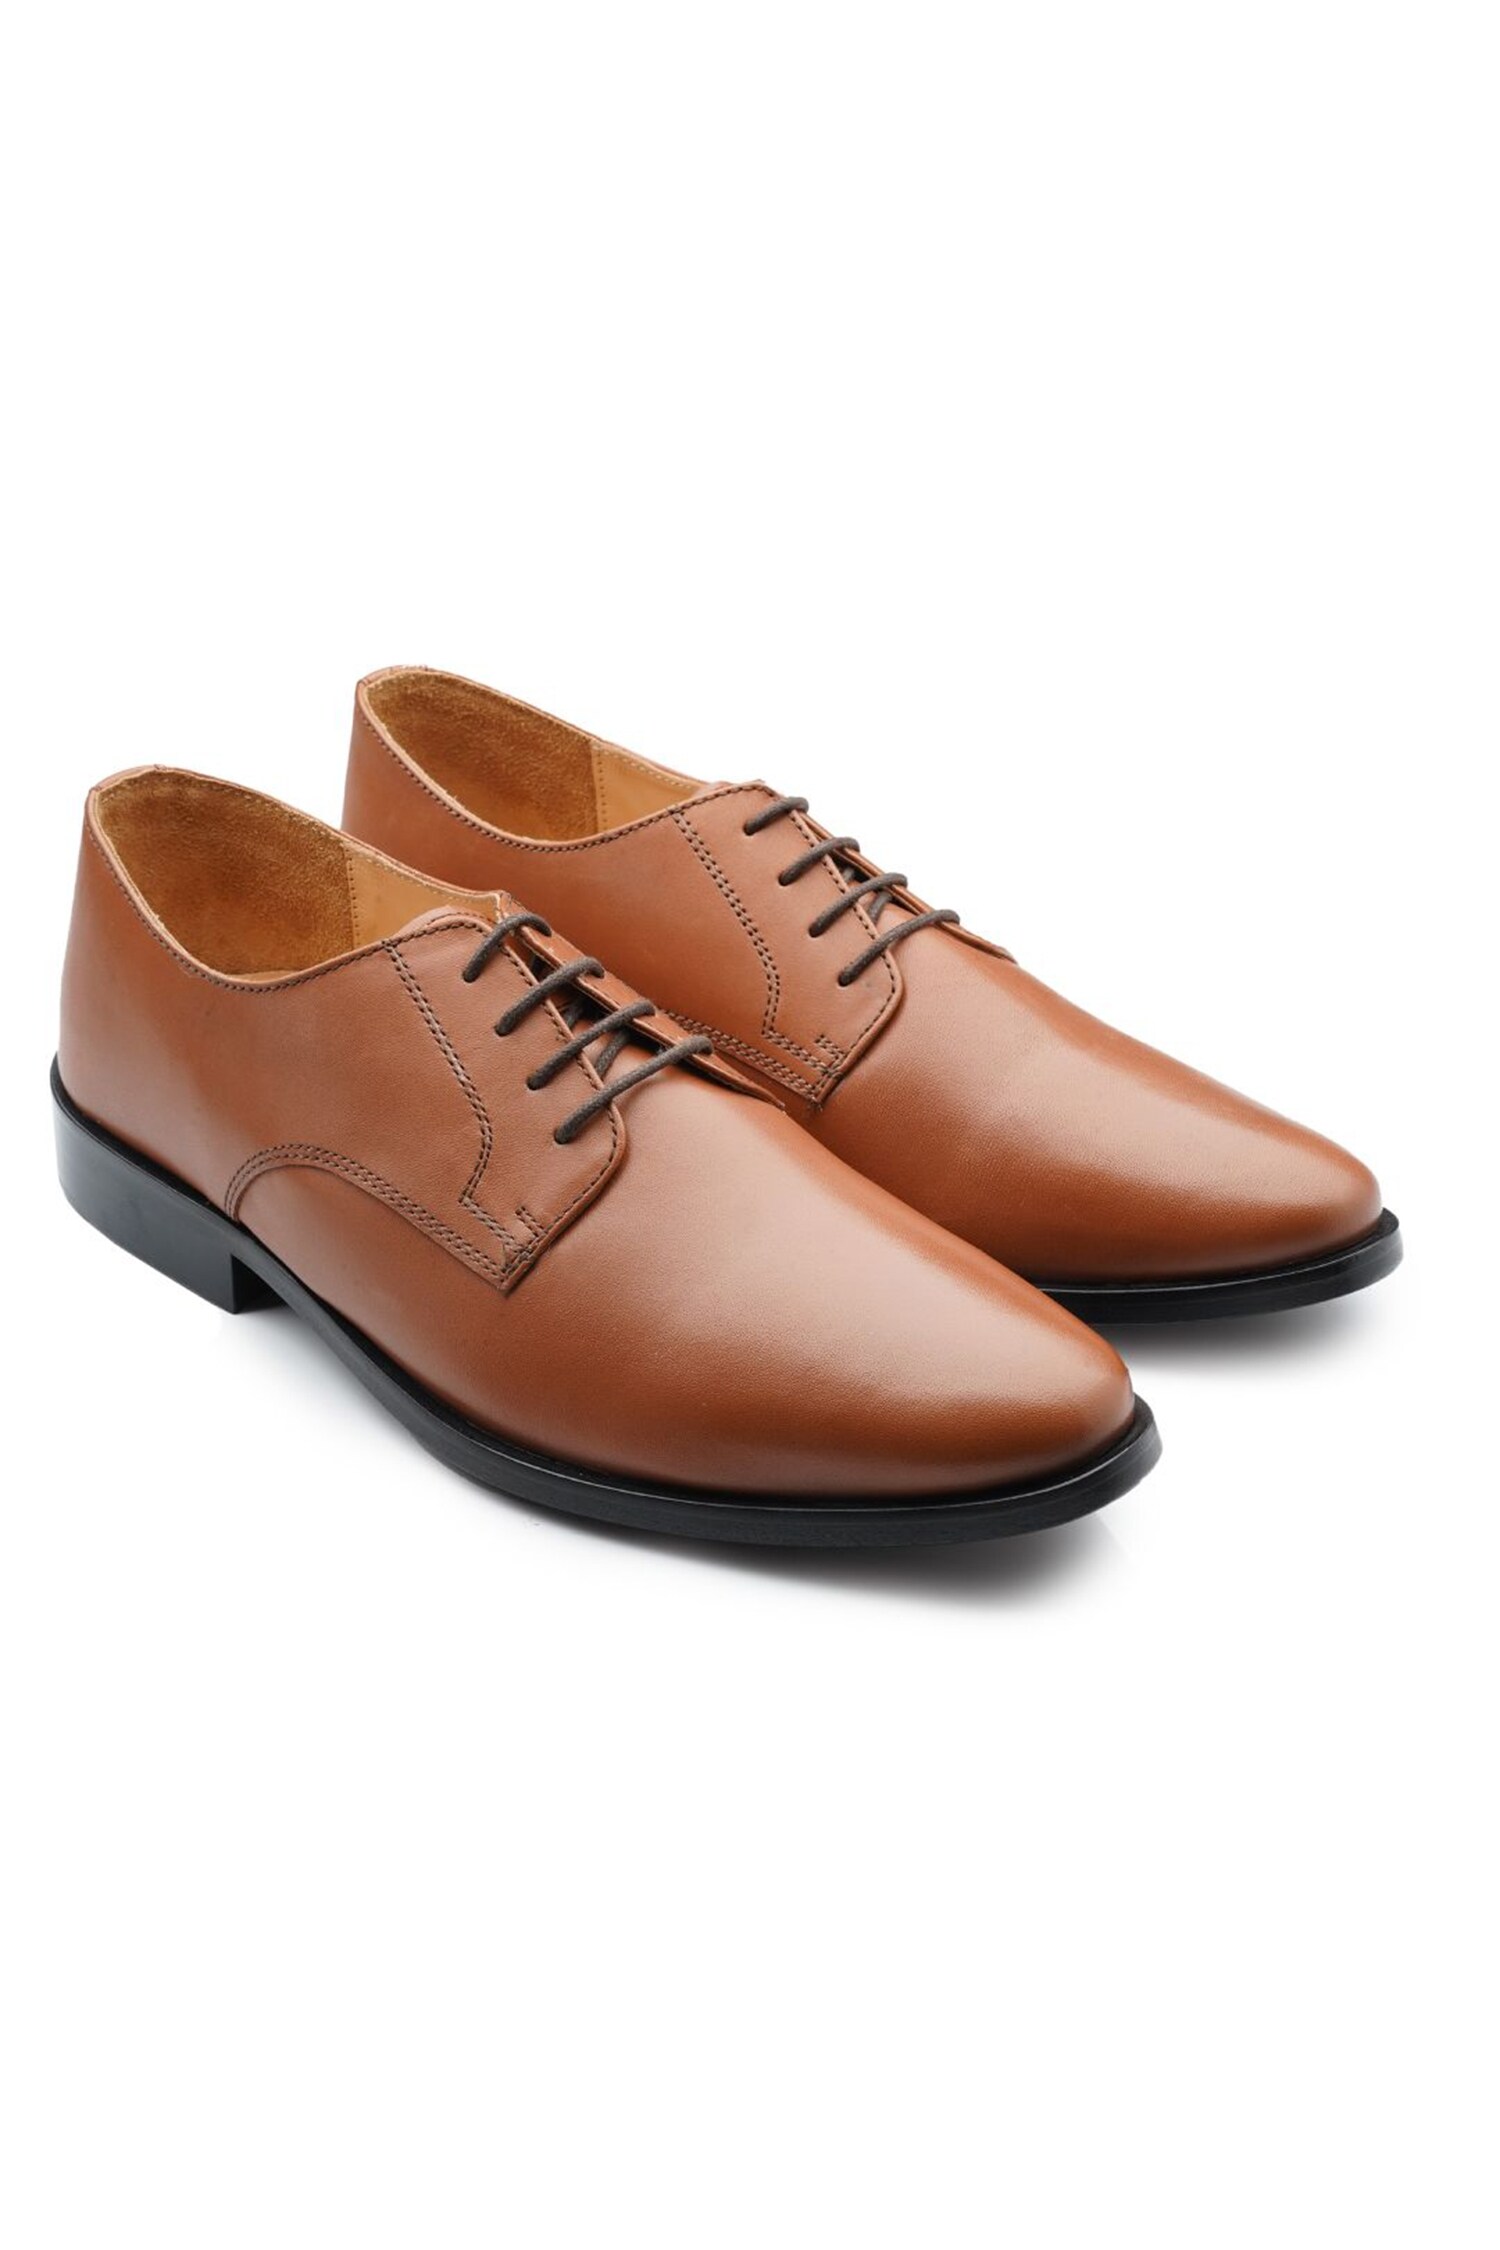 Rapawalk Brown Italian Soft Leather Handcrafted Lace Up Derby Shoes